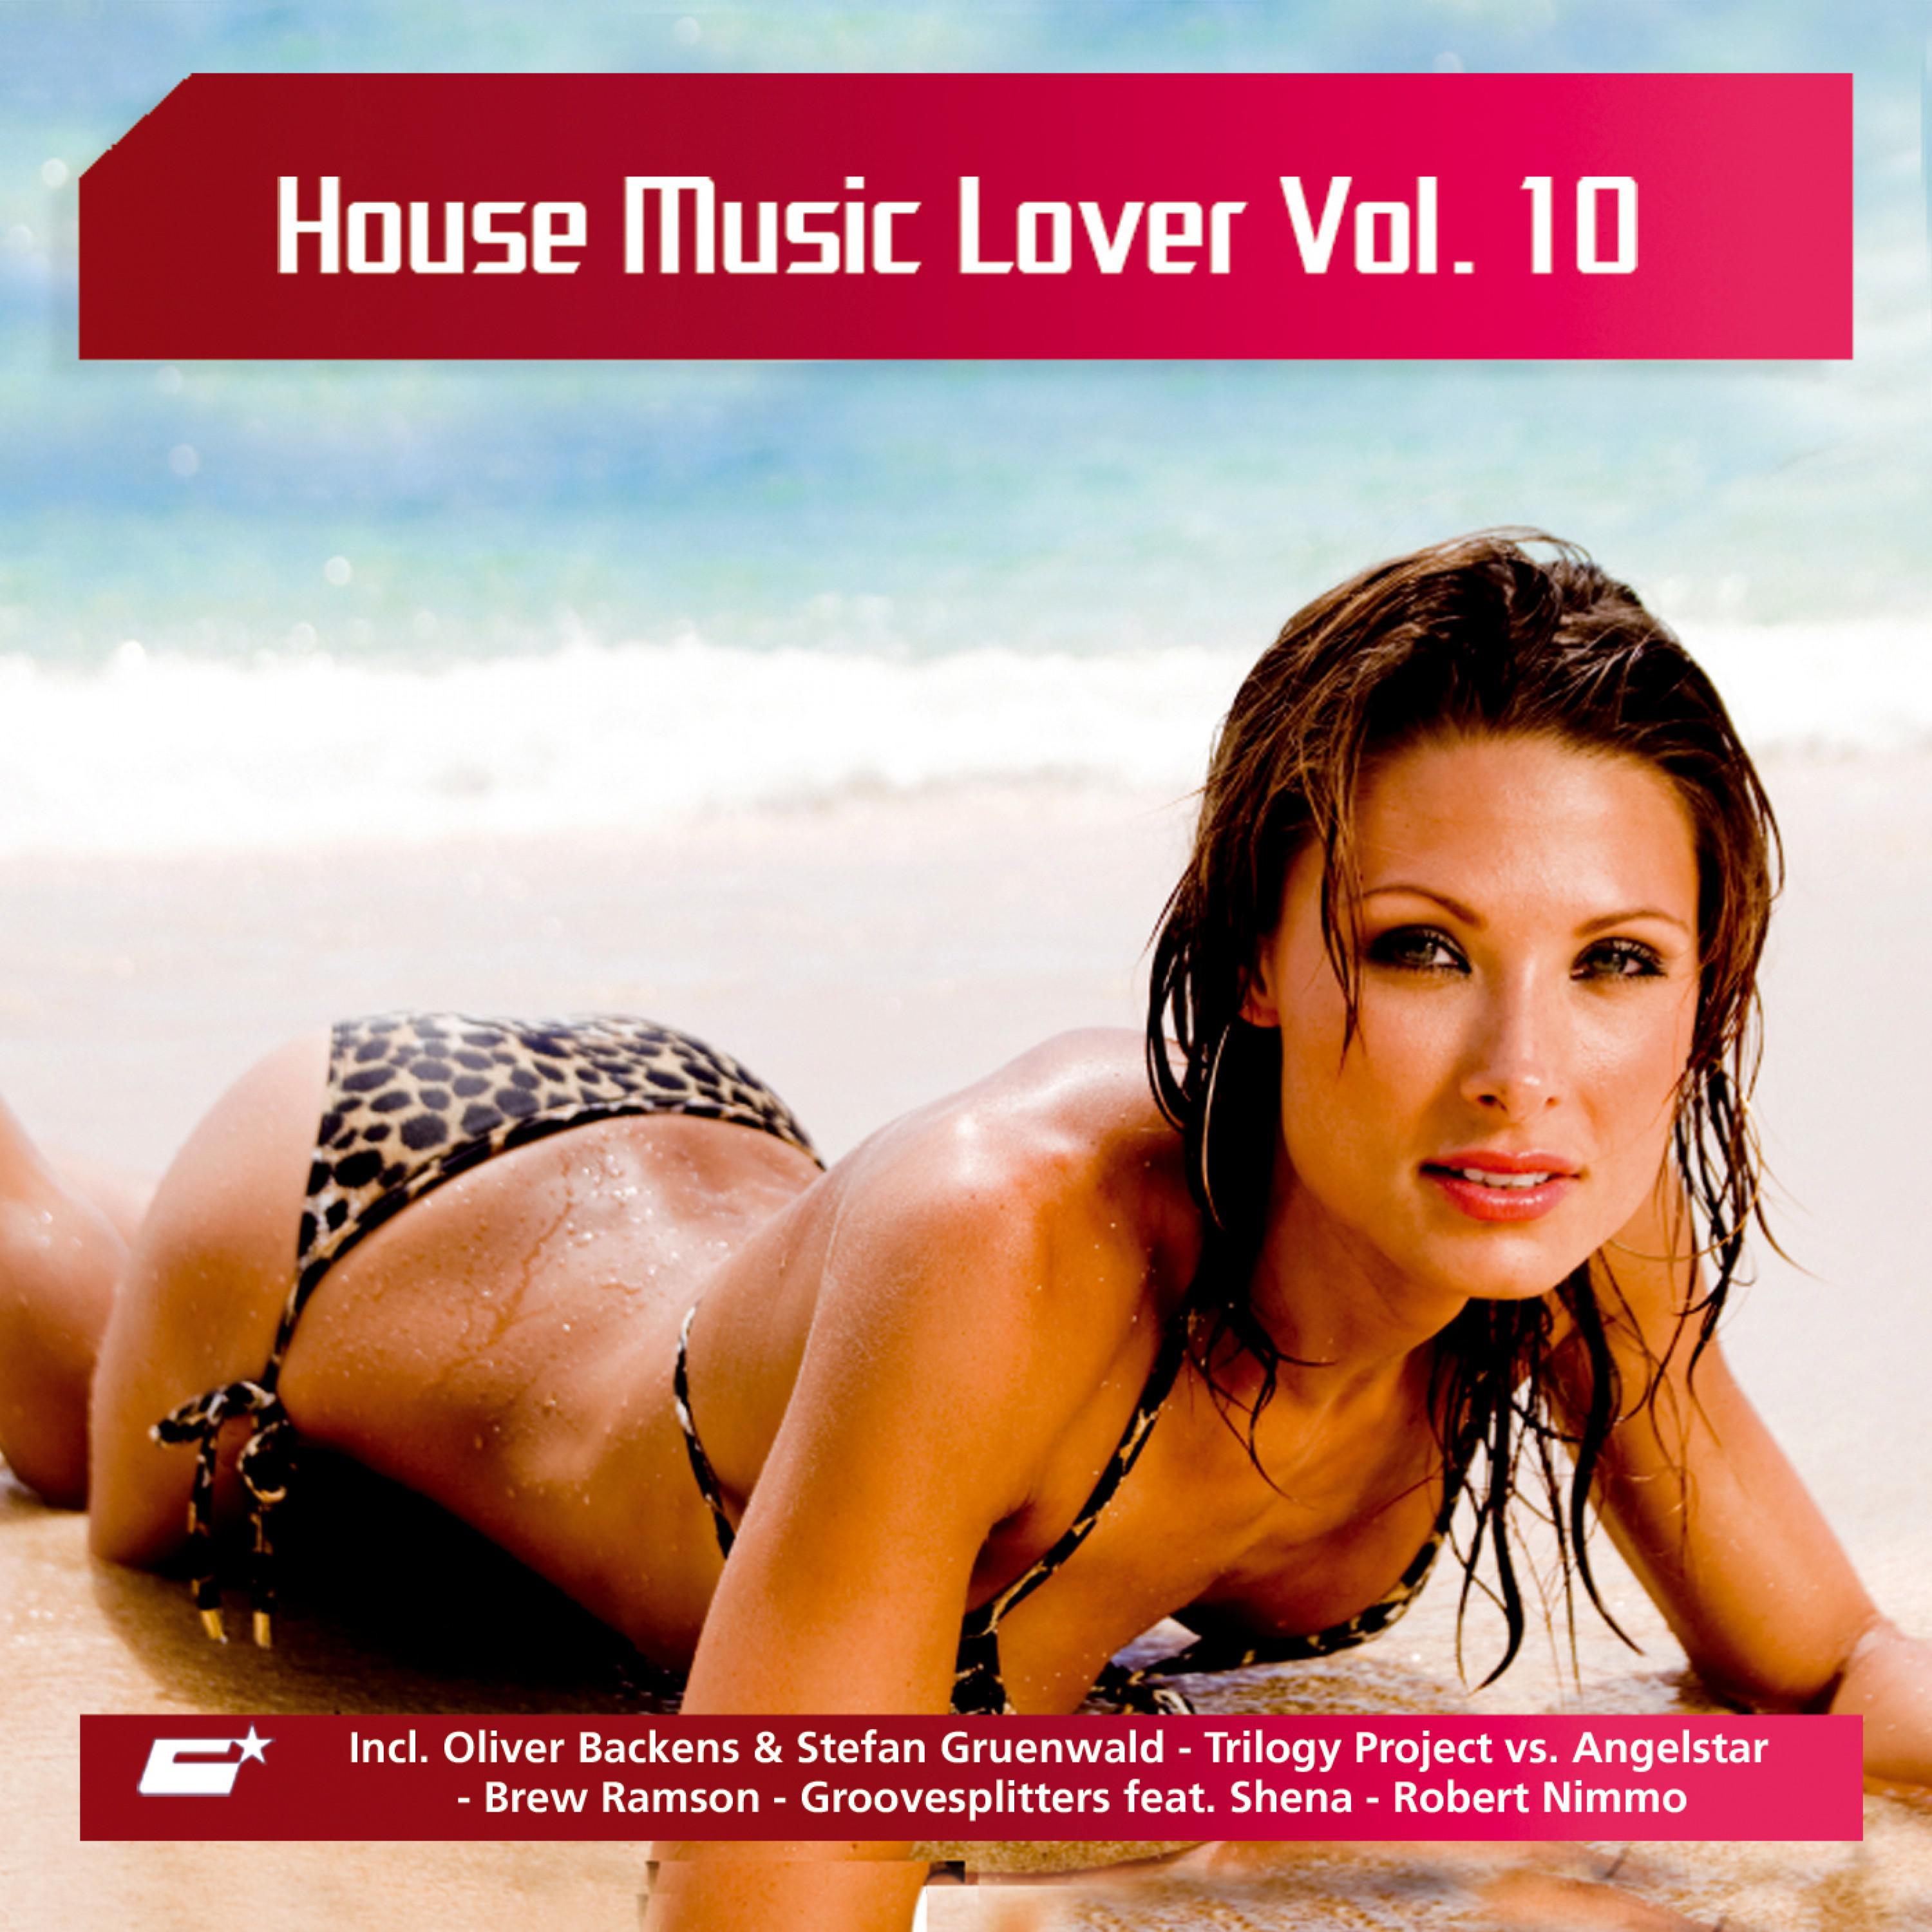 Hold On (Tighter to Love) (Steve More Club Mix)